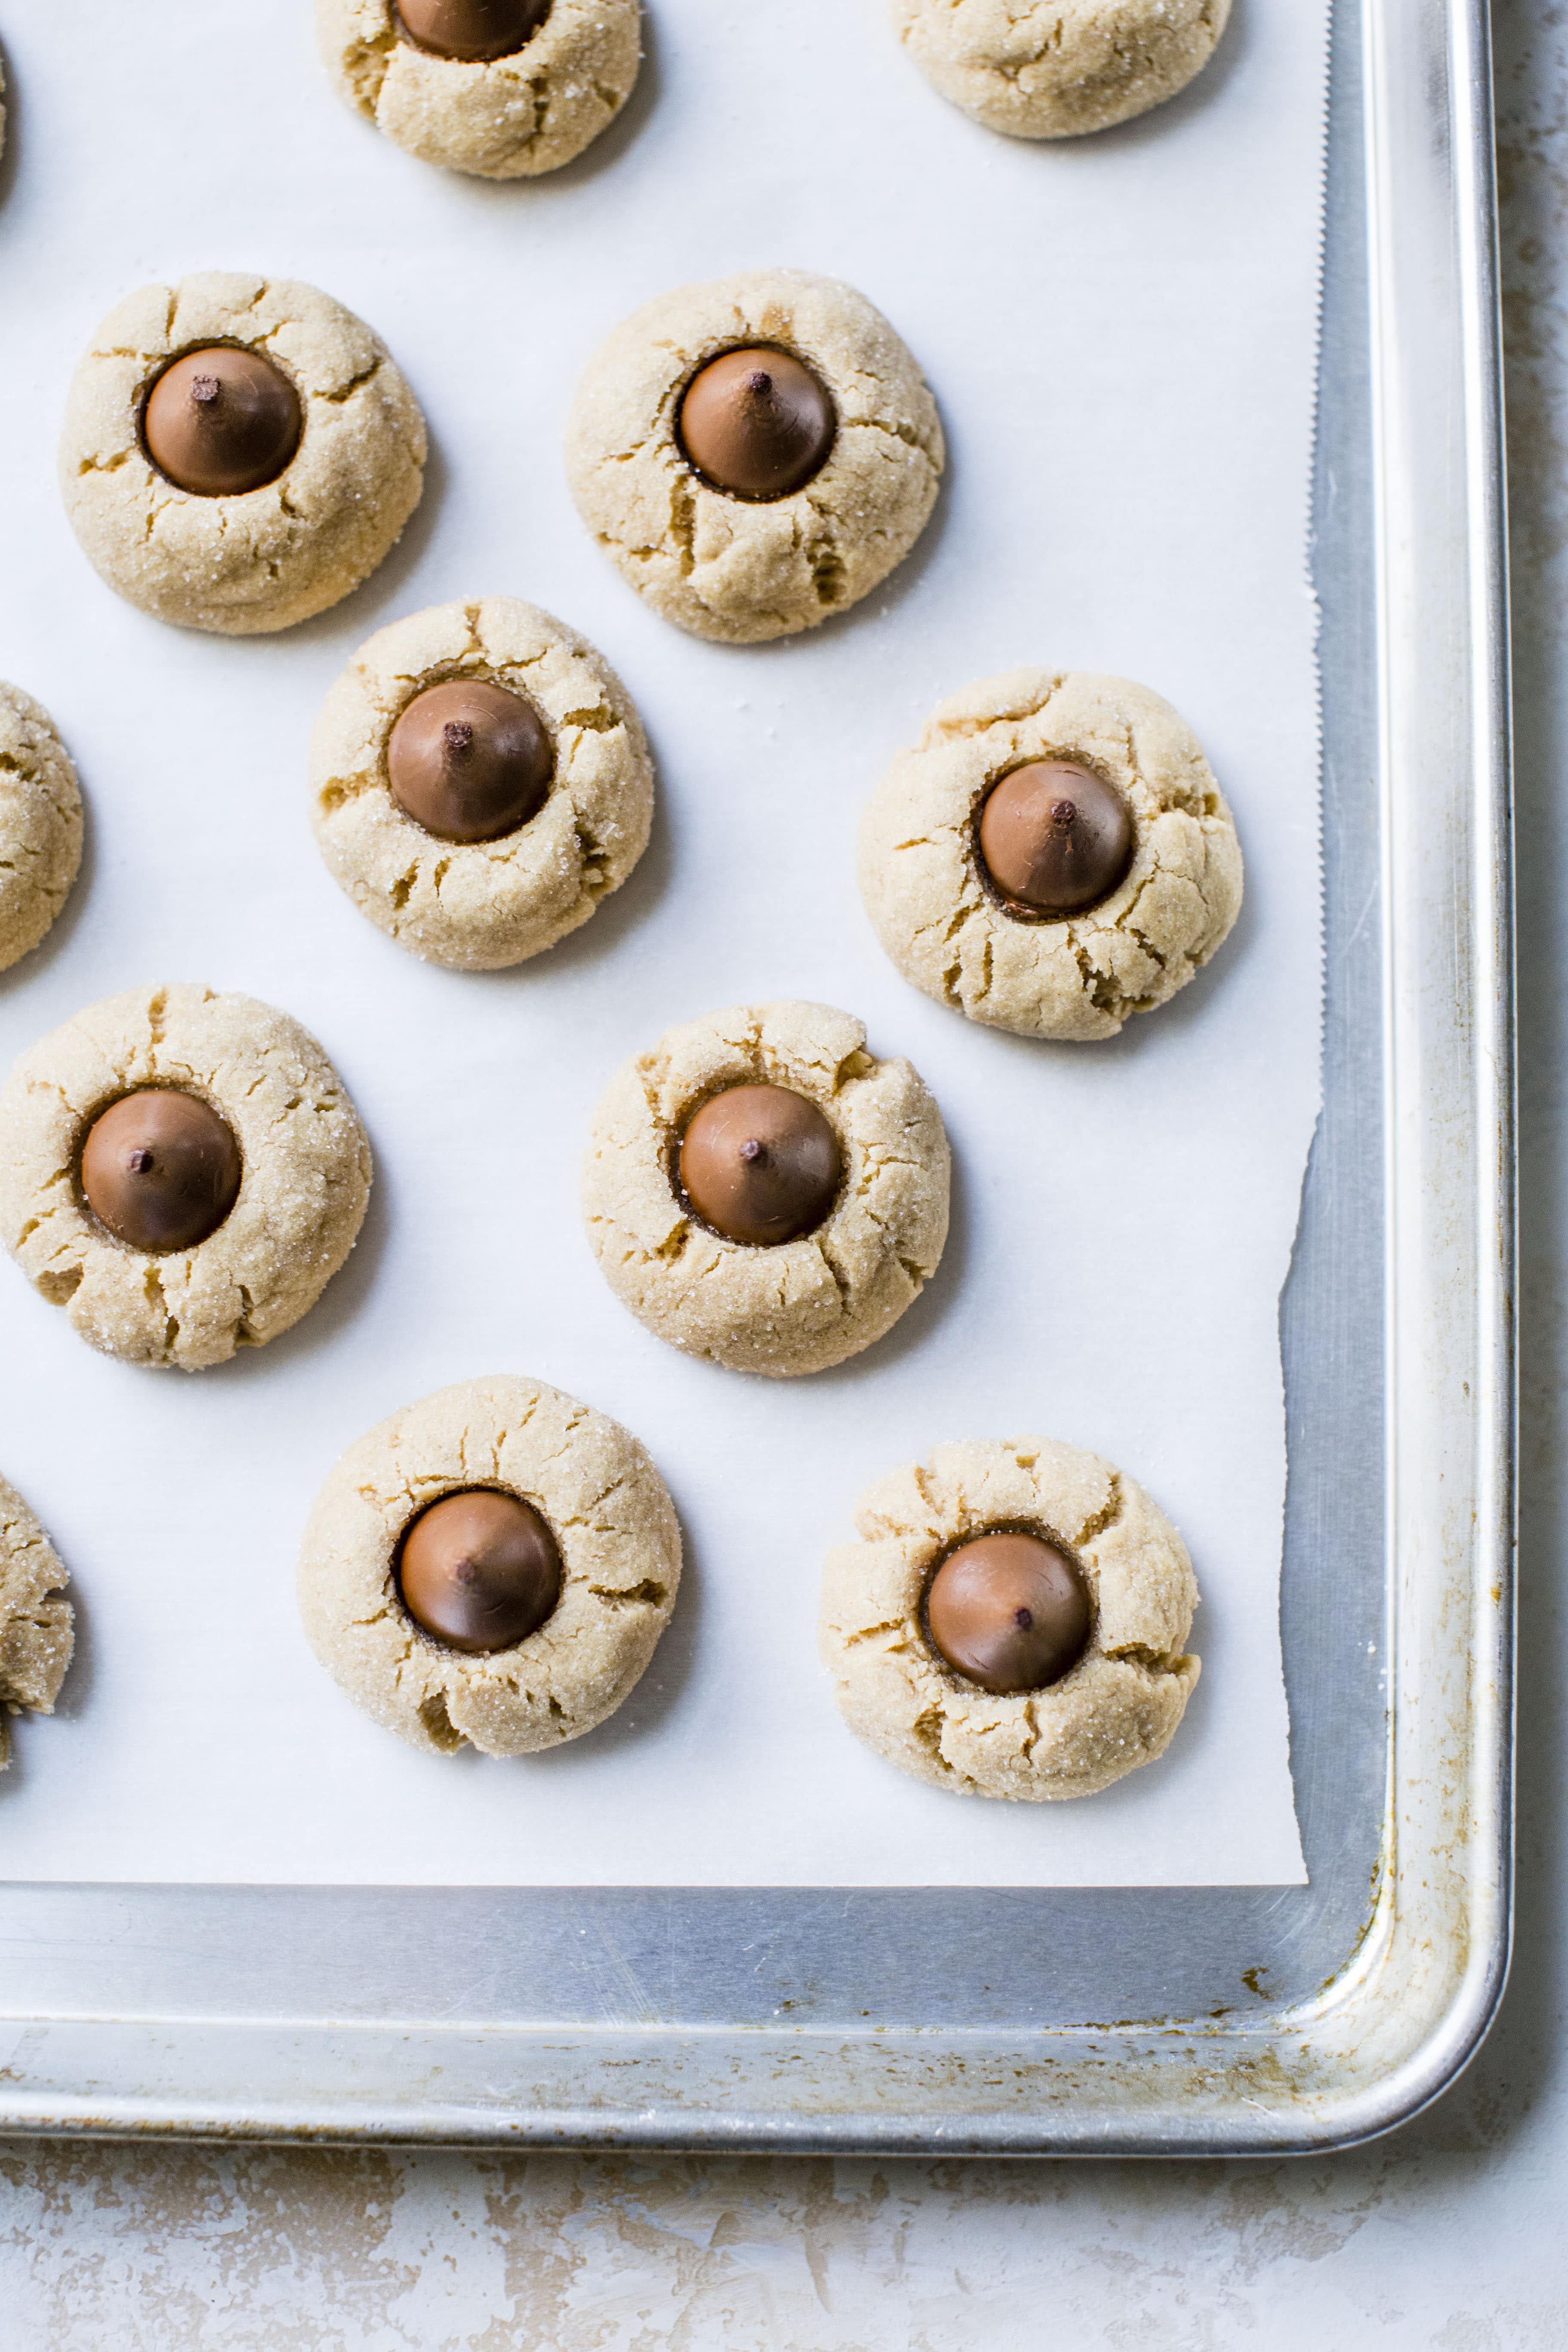 These are perfect peanut butter blossoms! My favorite cookie at christmastime has always been classic peanut butter blossoms and my grandma had the recipe nailed. These are super easy, delicious and will make a lot of cookies! I howsweeteats.com #peanutbutter #blossoms